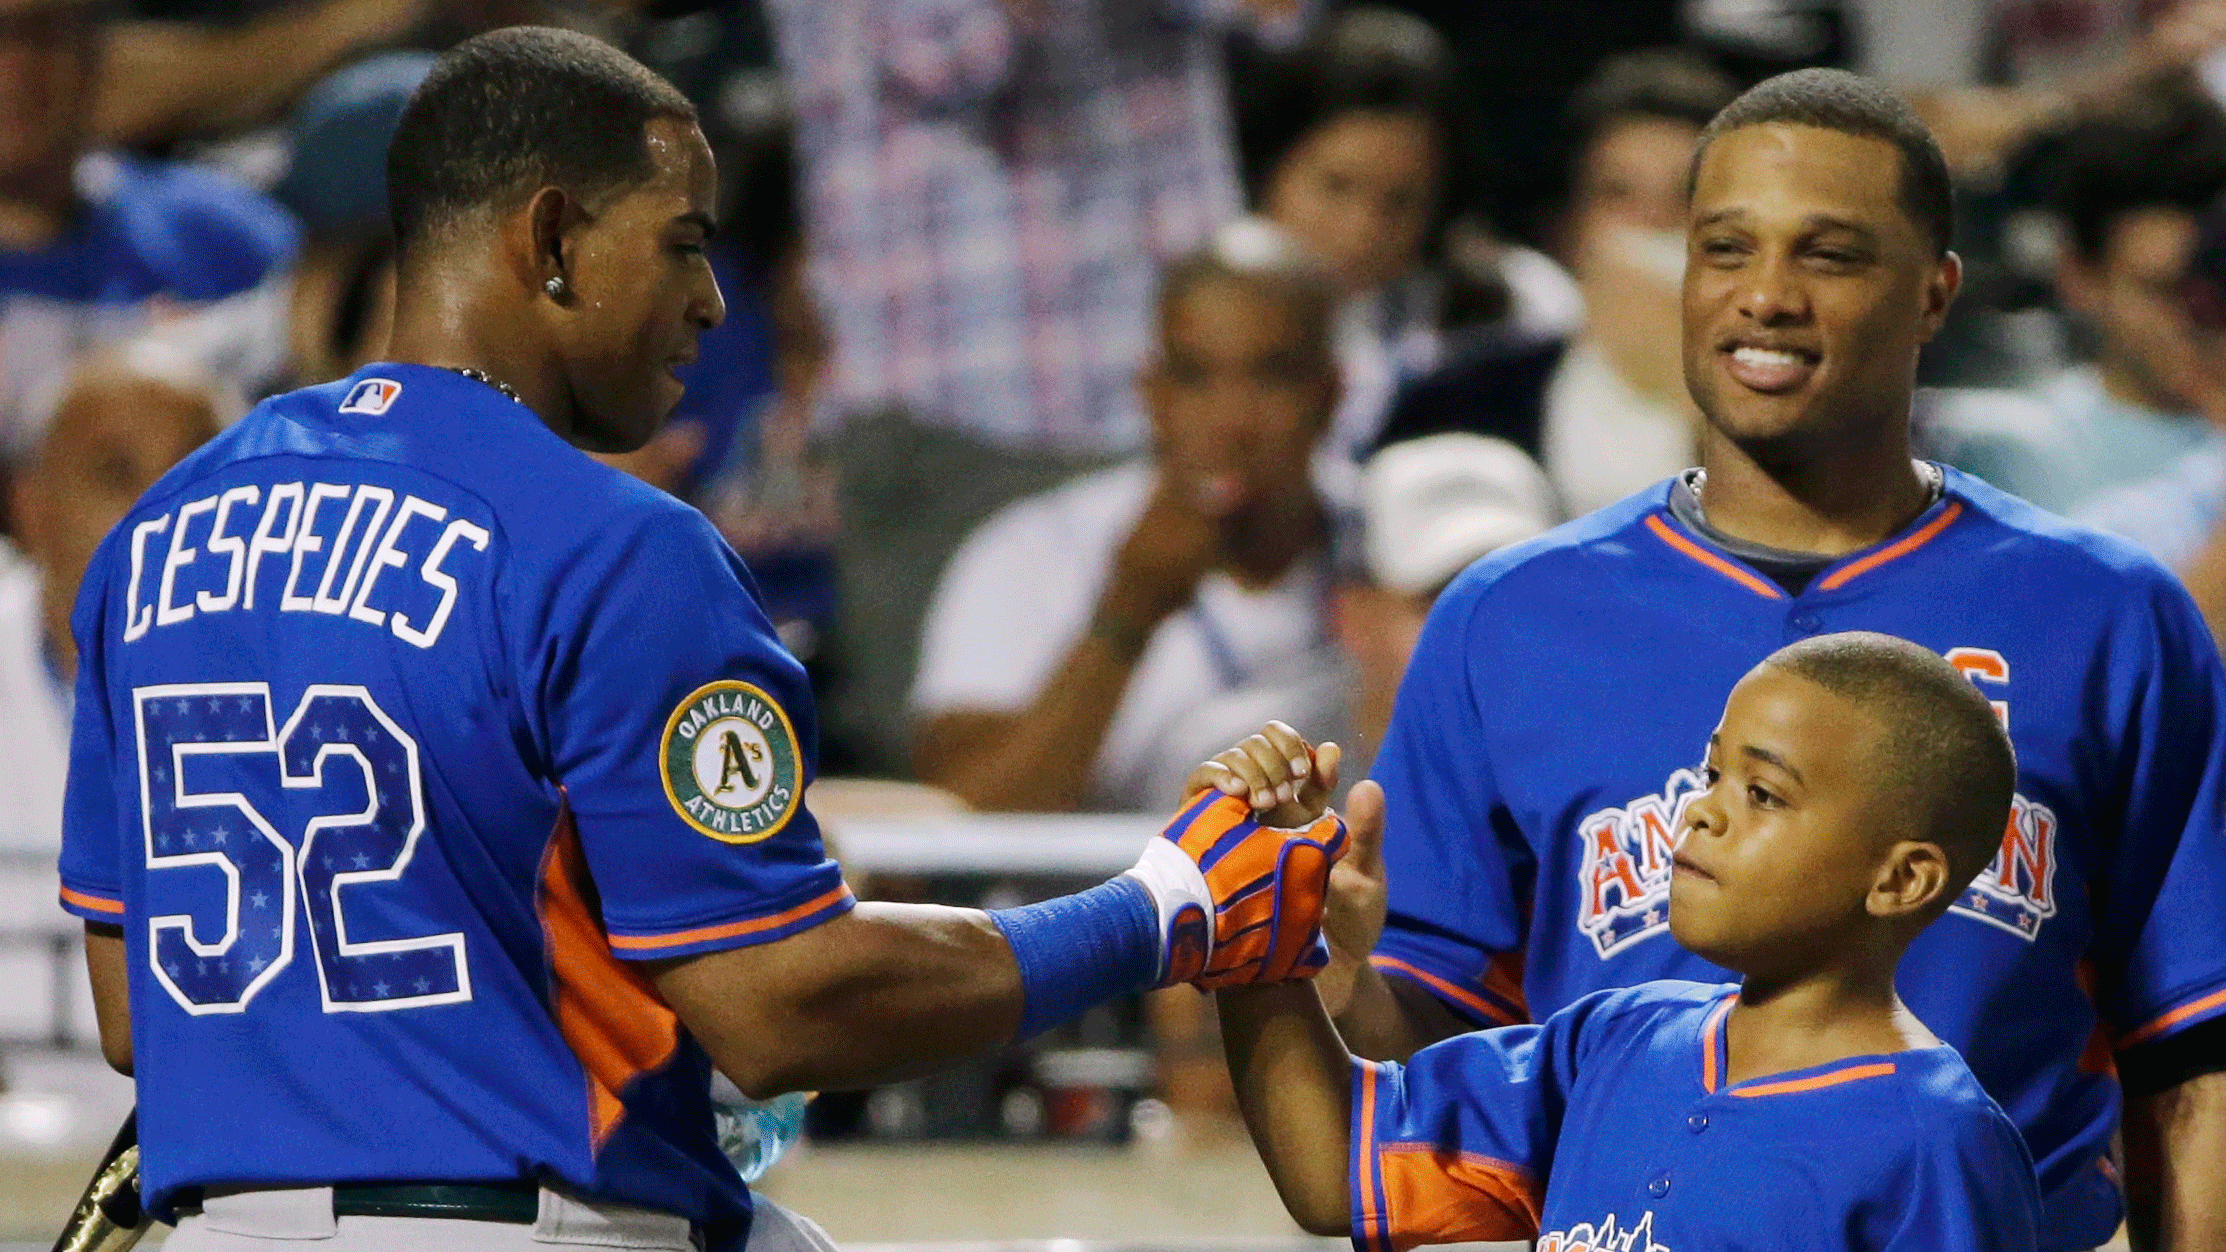 Yoenis Cespedes is congratulated by a child and Robinson Cano. (AP/Matt Slocum)